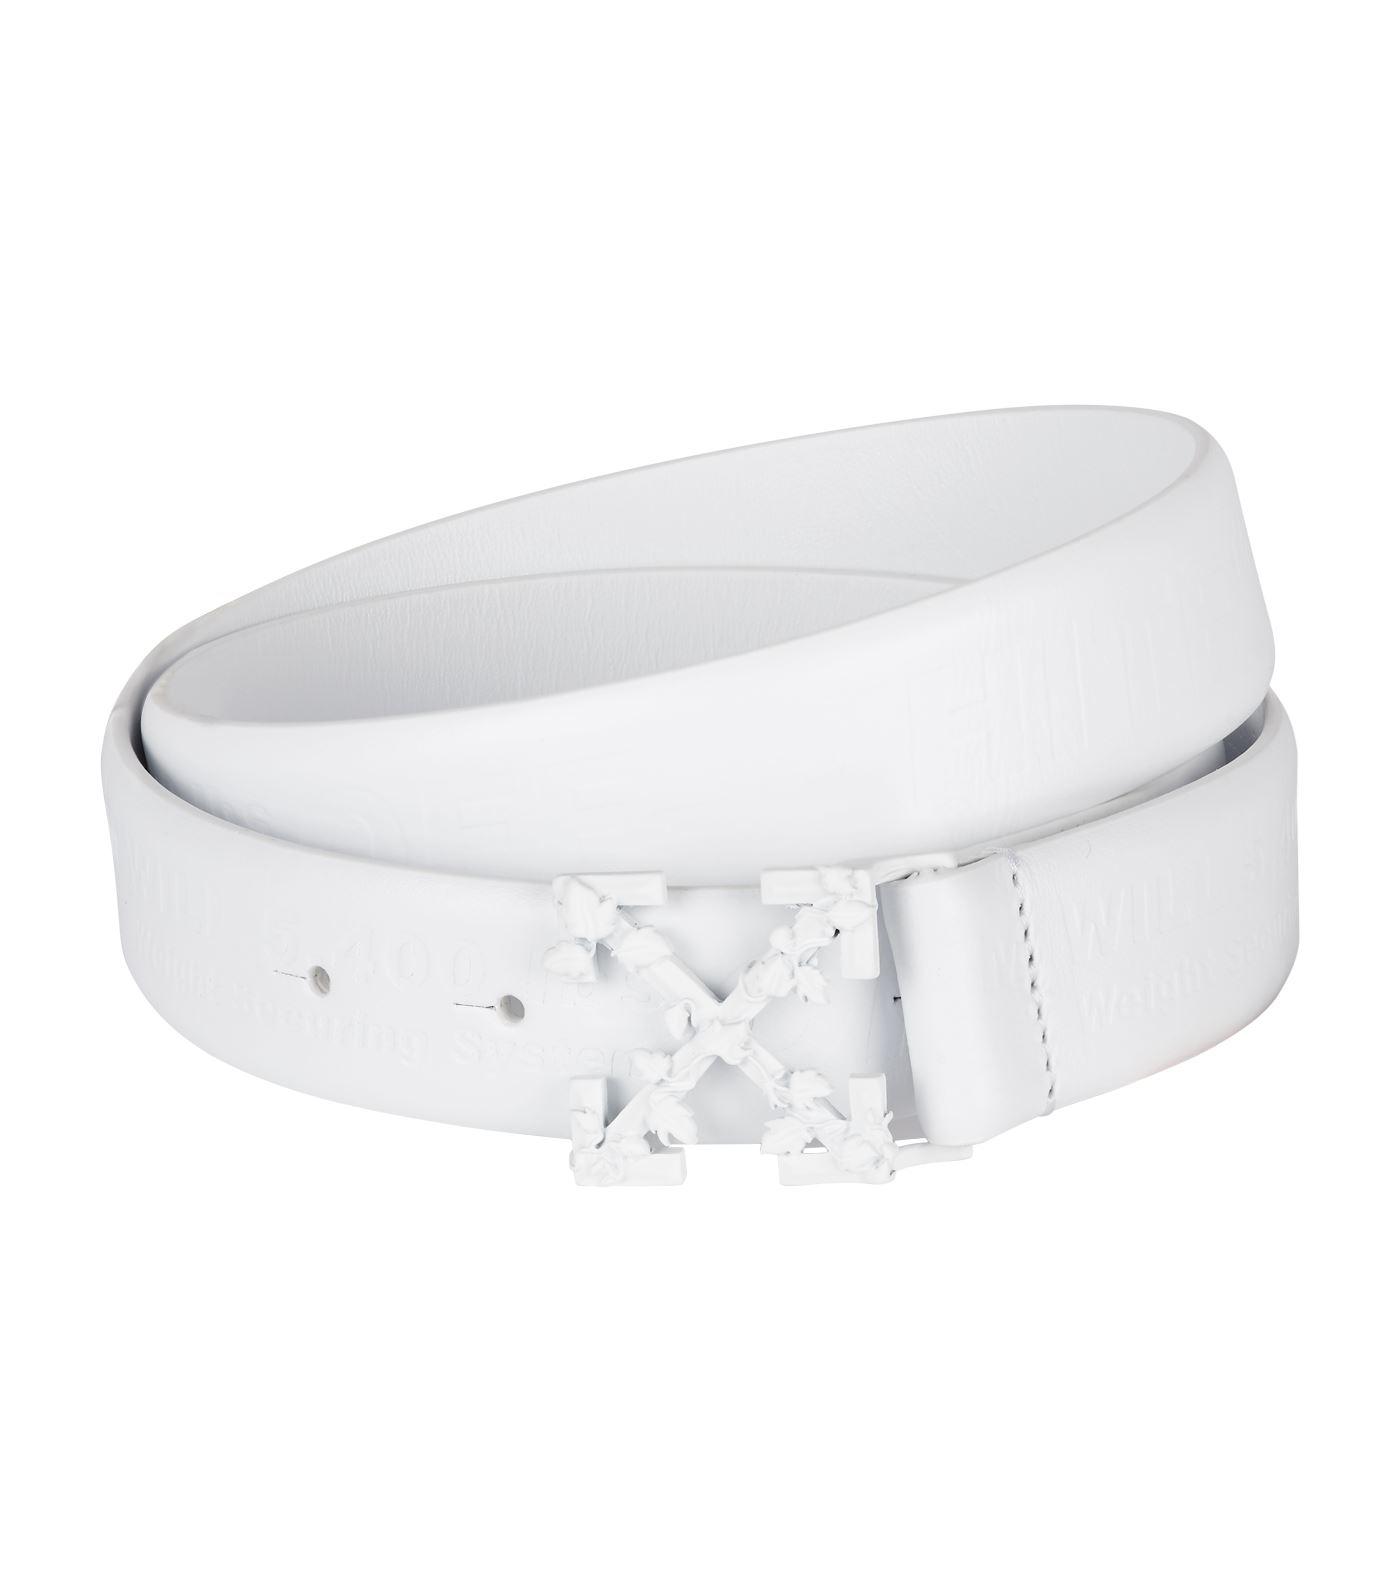 Off-White c/o Virgil Abloh Leather Industrial Belt in White - Lyst